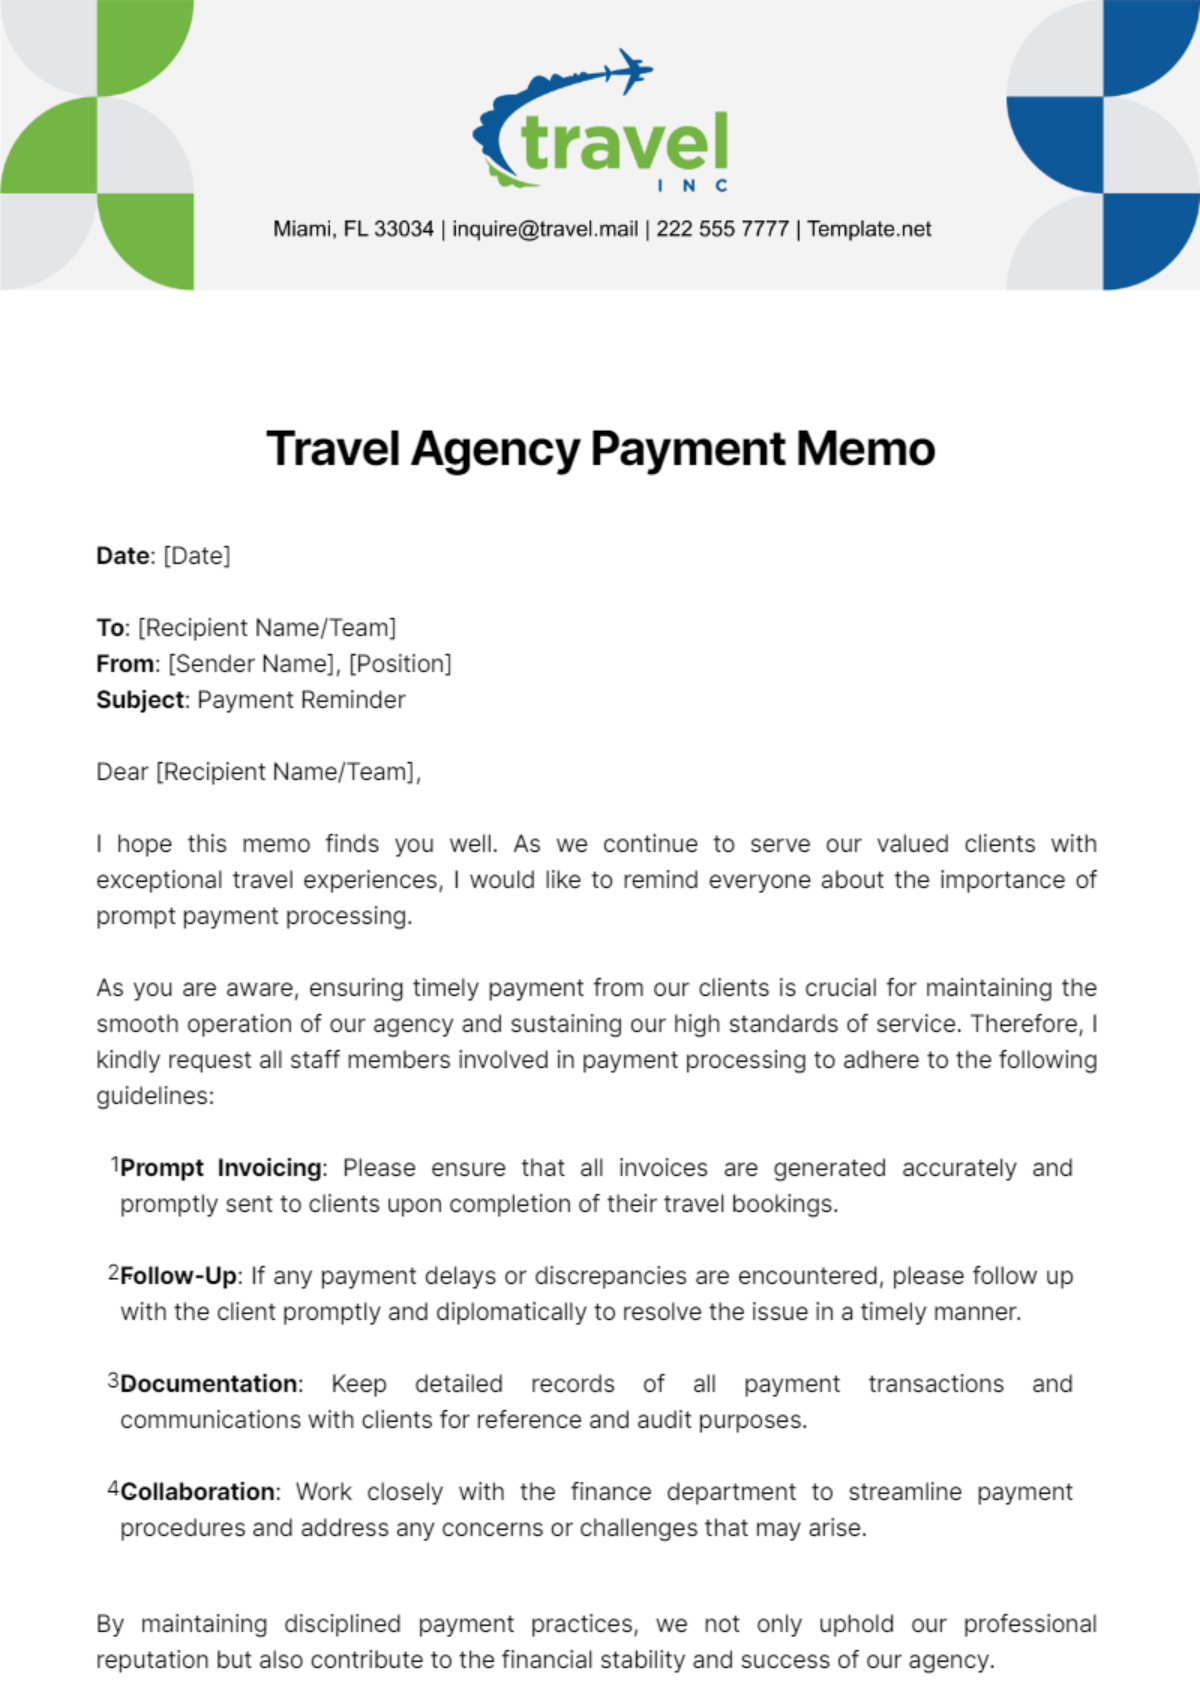 Free Travel Agency Payment Memo Template